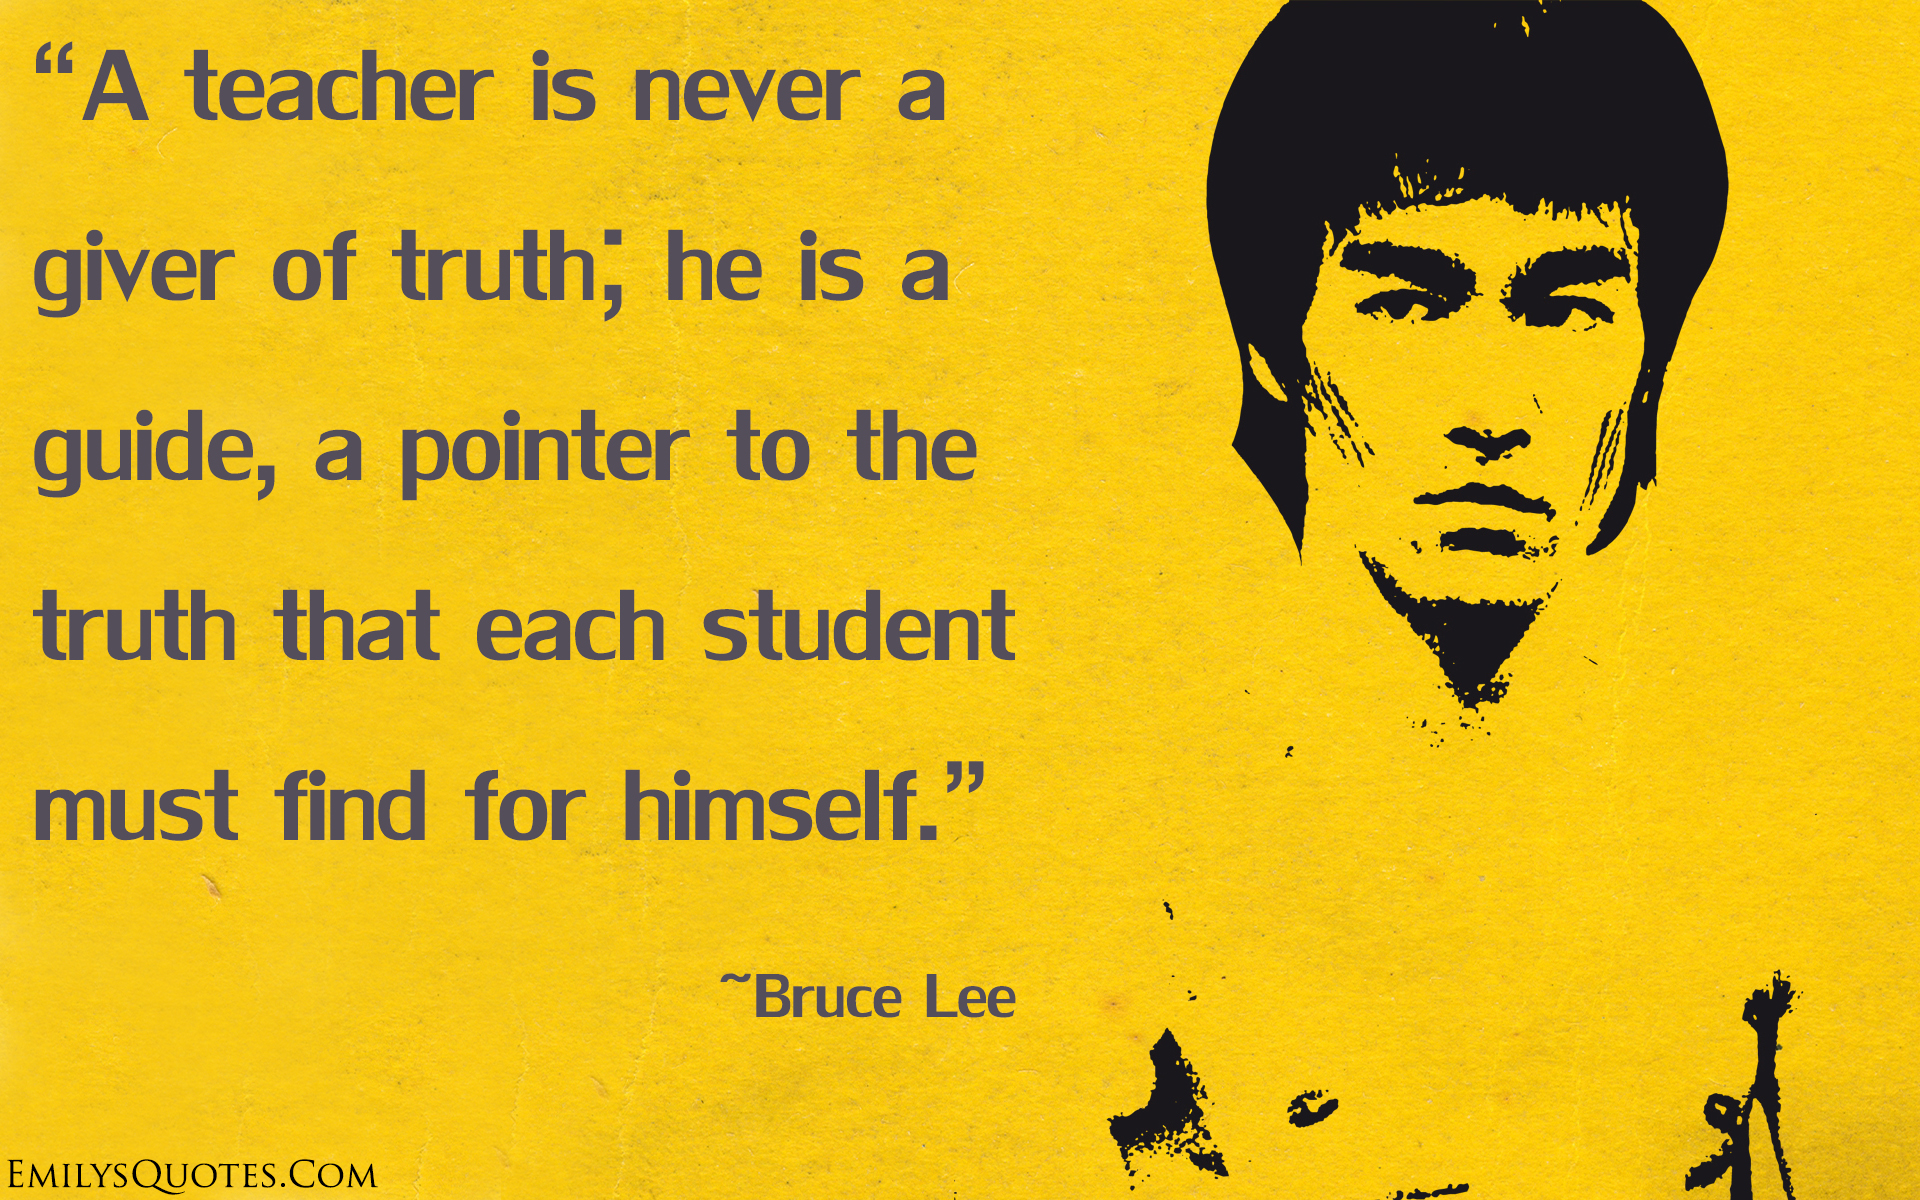 A teacher is never a giver of truth; he is a guide, a pointer to the truth that each student must find for himself